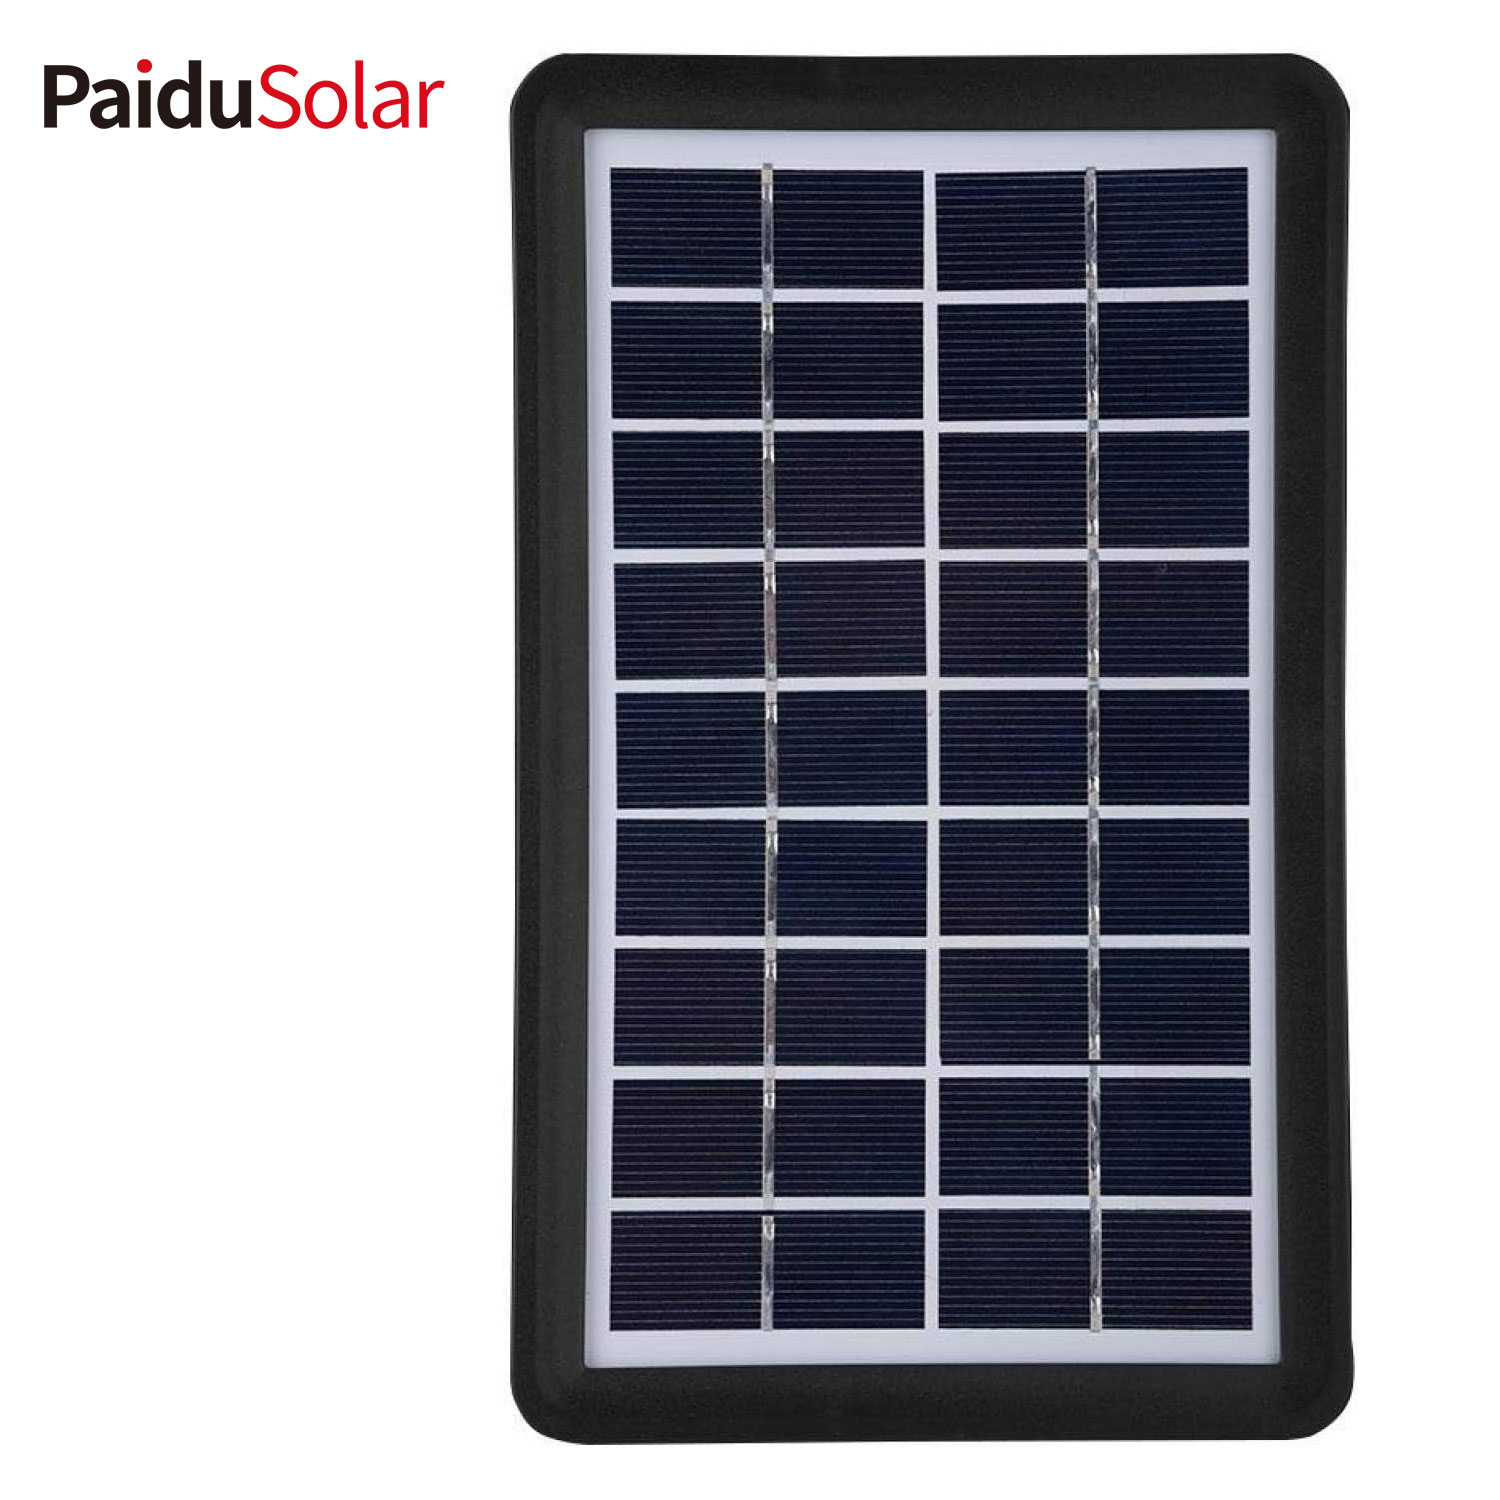 PaiduSolar 9V 3W Poly Silicon Solar Panel Solar Cell For Battery Charging Boat